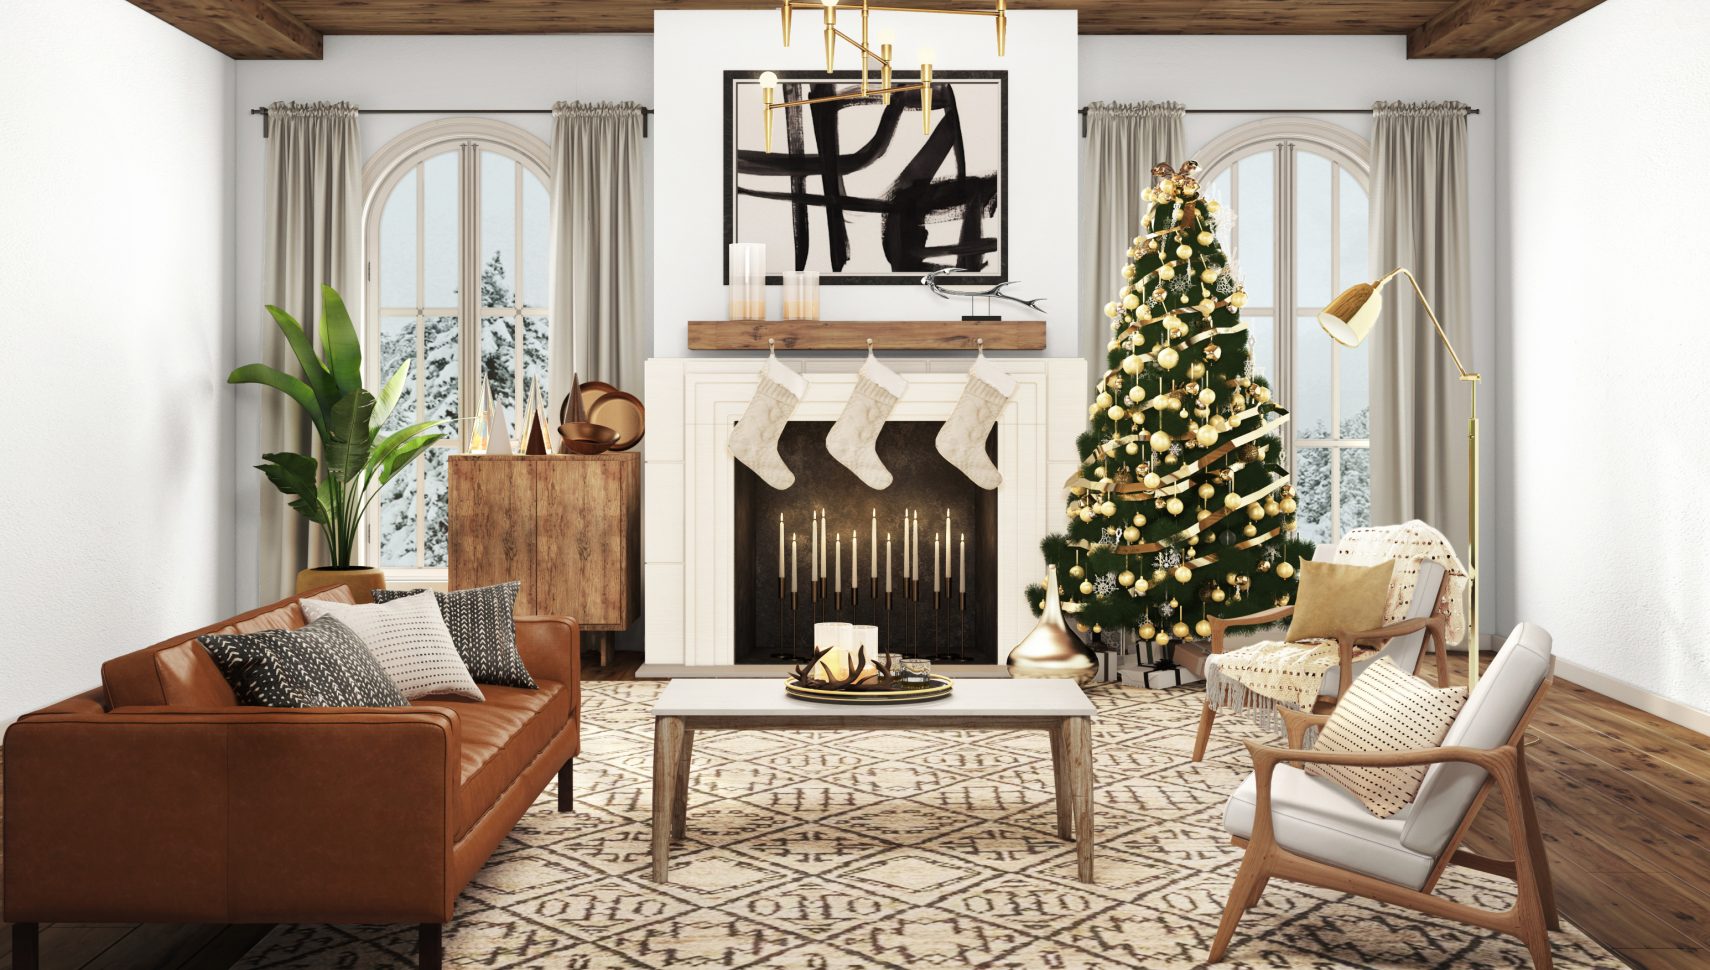 Deck the Halls with These Christmas Zoom Backgrounds | Havenly Blog |  Havenly Interior Design Blog